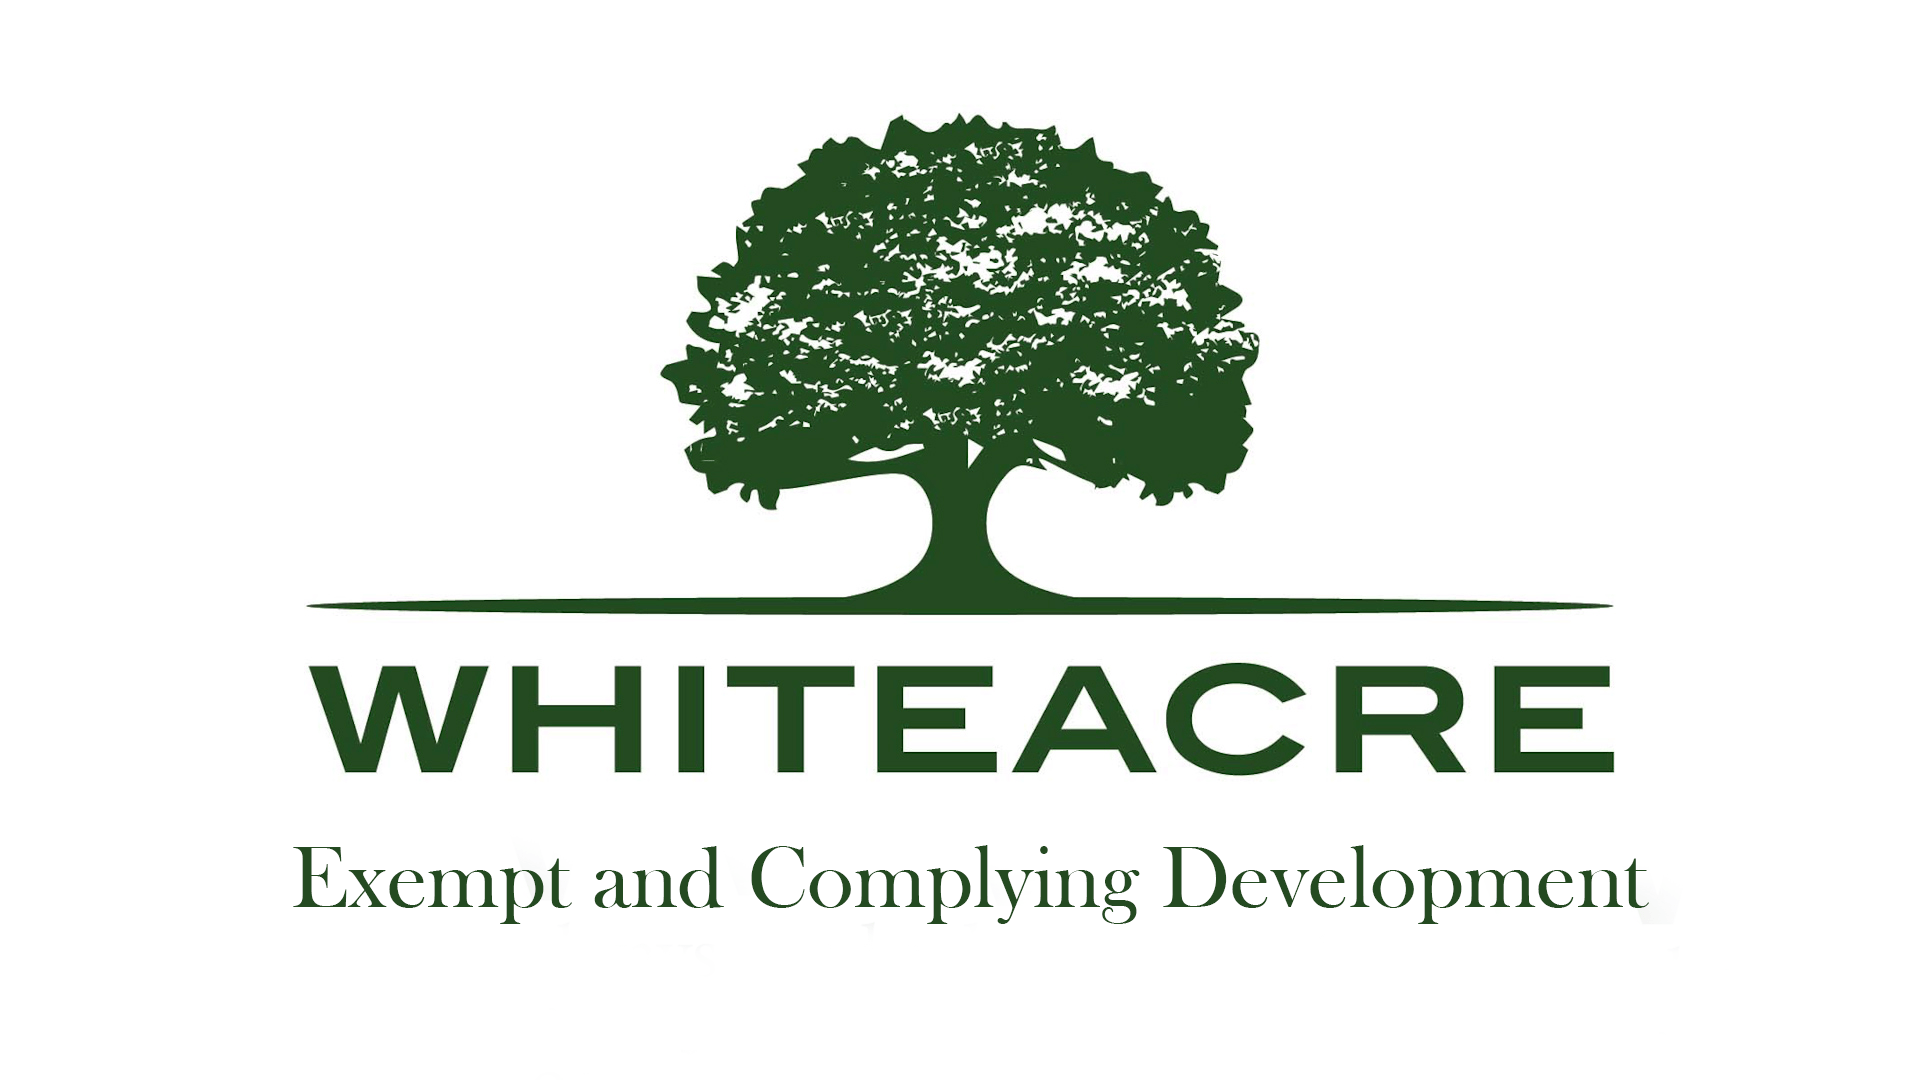 Whiteacre exempt and complying development